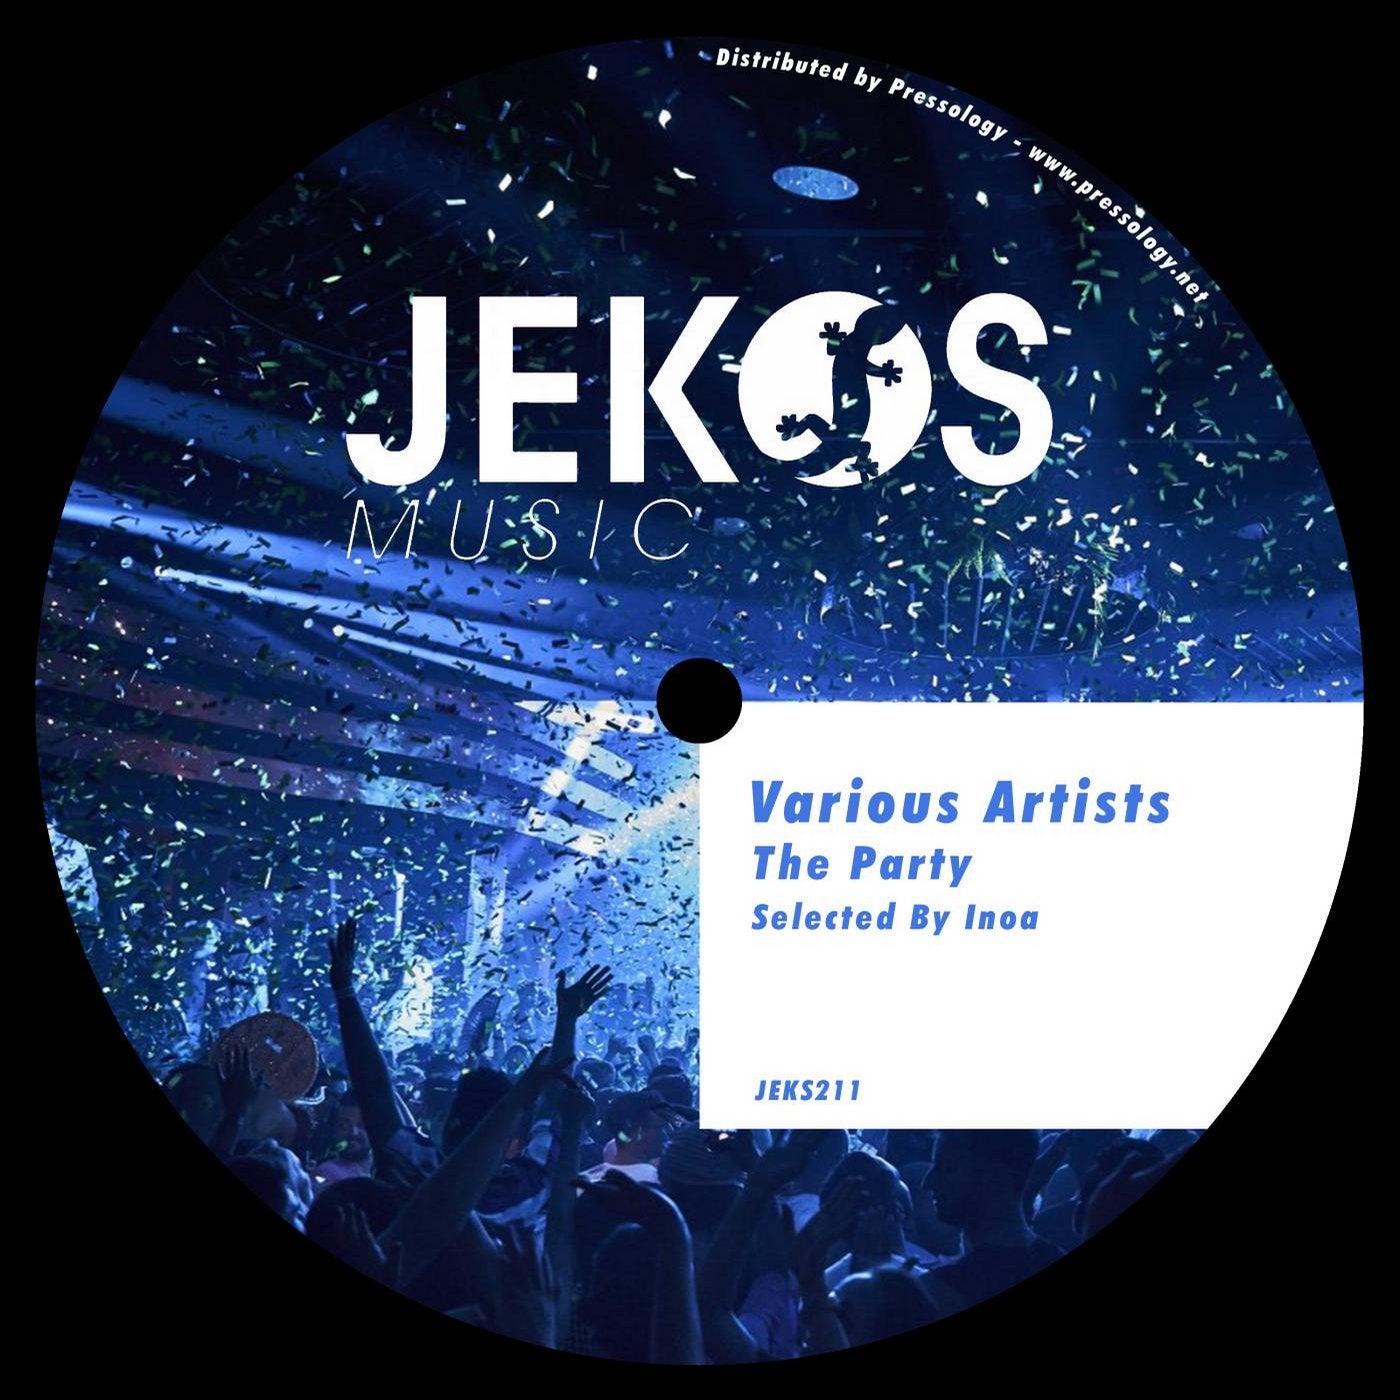 The Party - Selected By Inoa